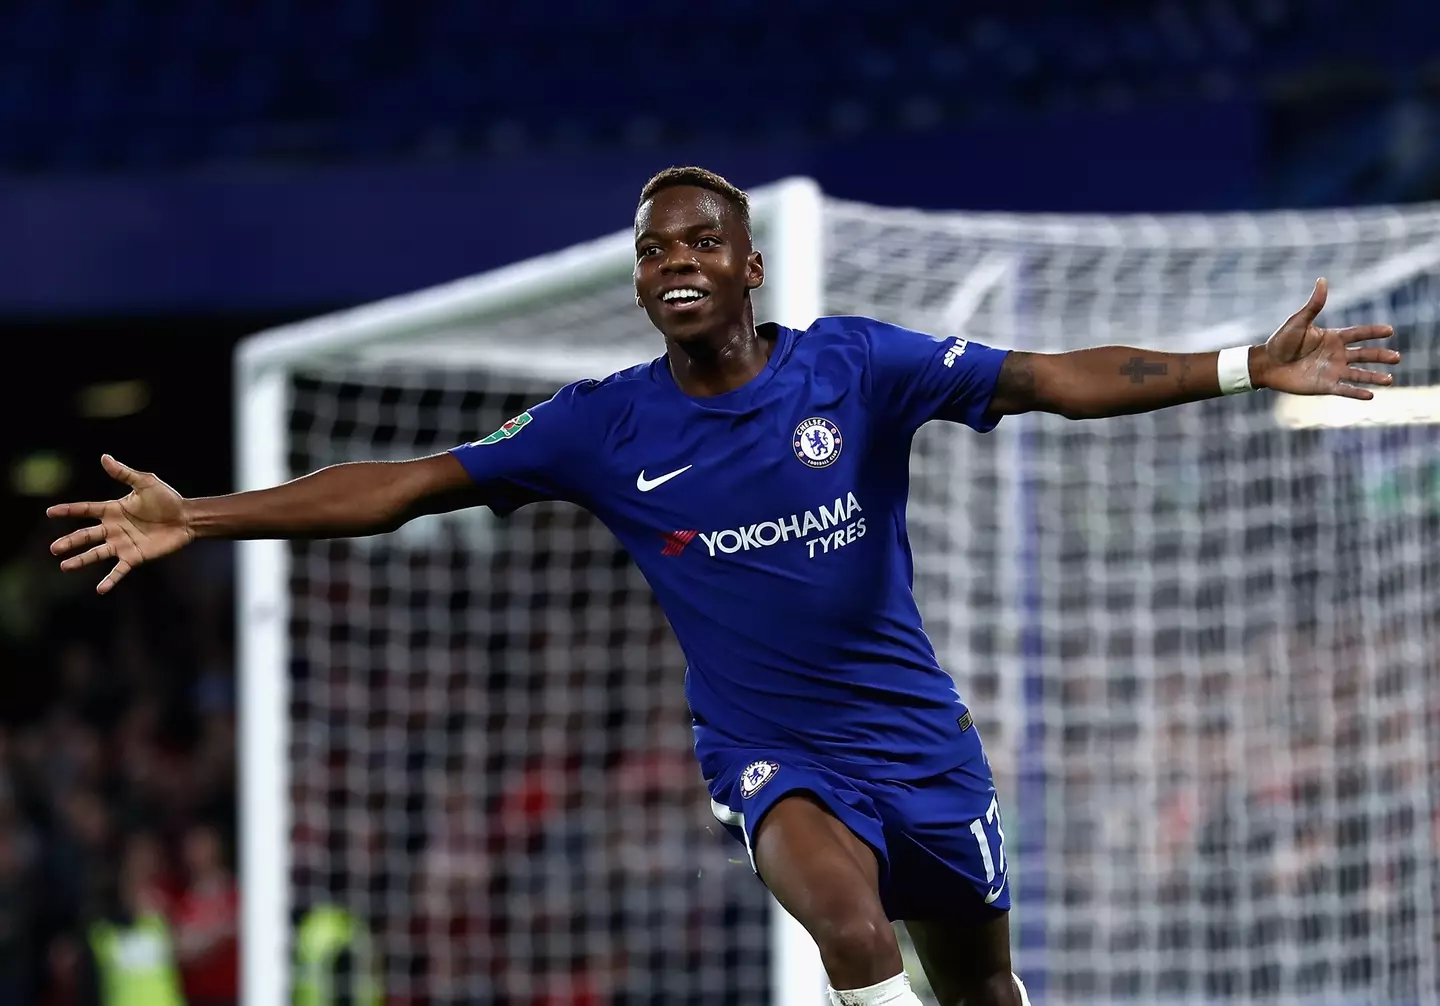 Musonda was tipped for greatness at Chelsea (Getty)